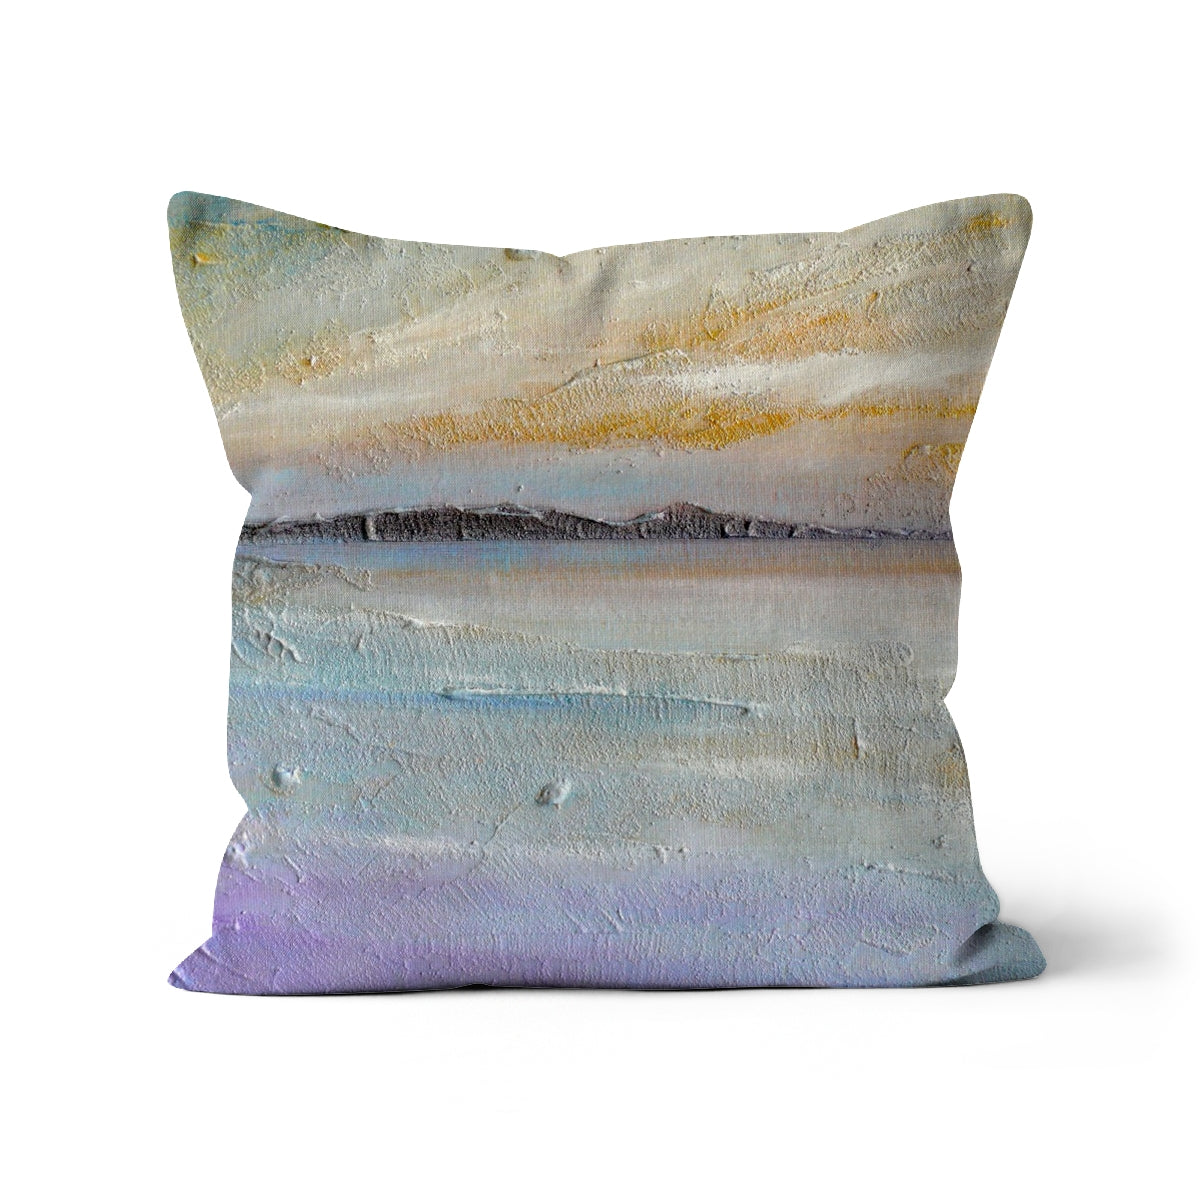 Sollas Beach South Uist Art Gifts Cushion-Cushions-Hebridean Islands Art Gallery-Faux Suede-22"x22"-Paintings, Prints, Homeware, Art Gifts From Scotland By Scottish Artist Kevin Hunter